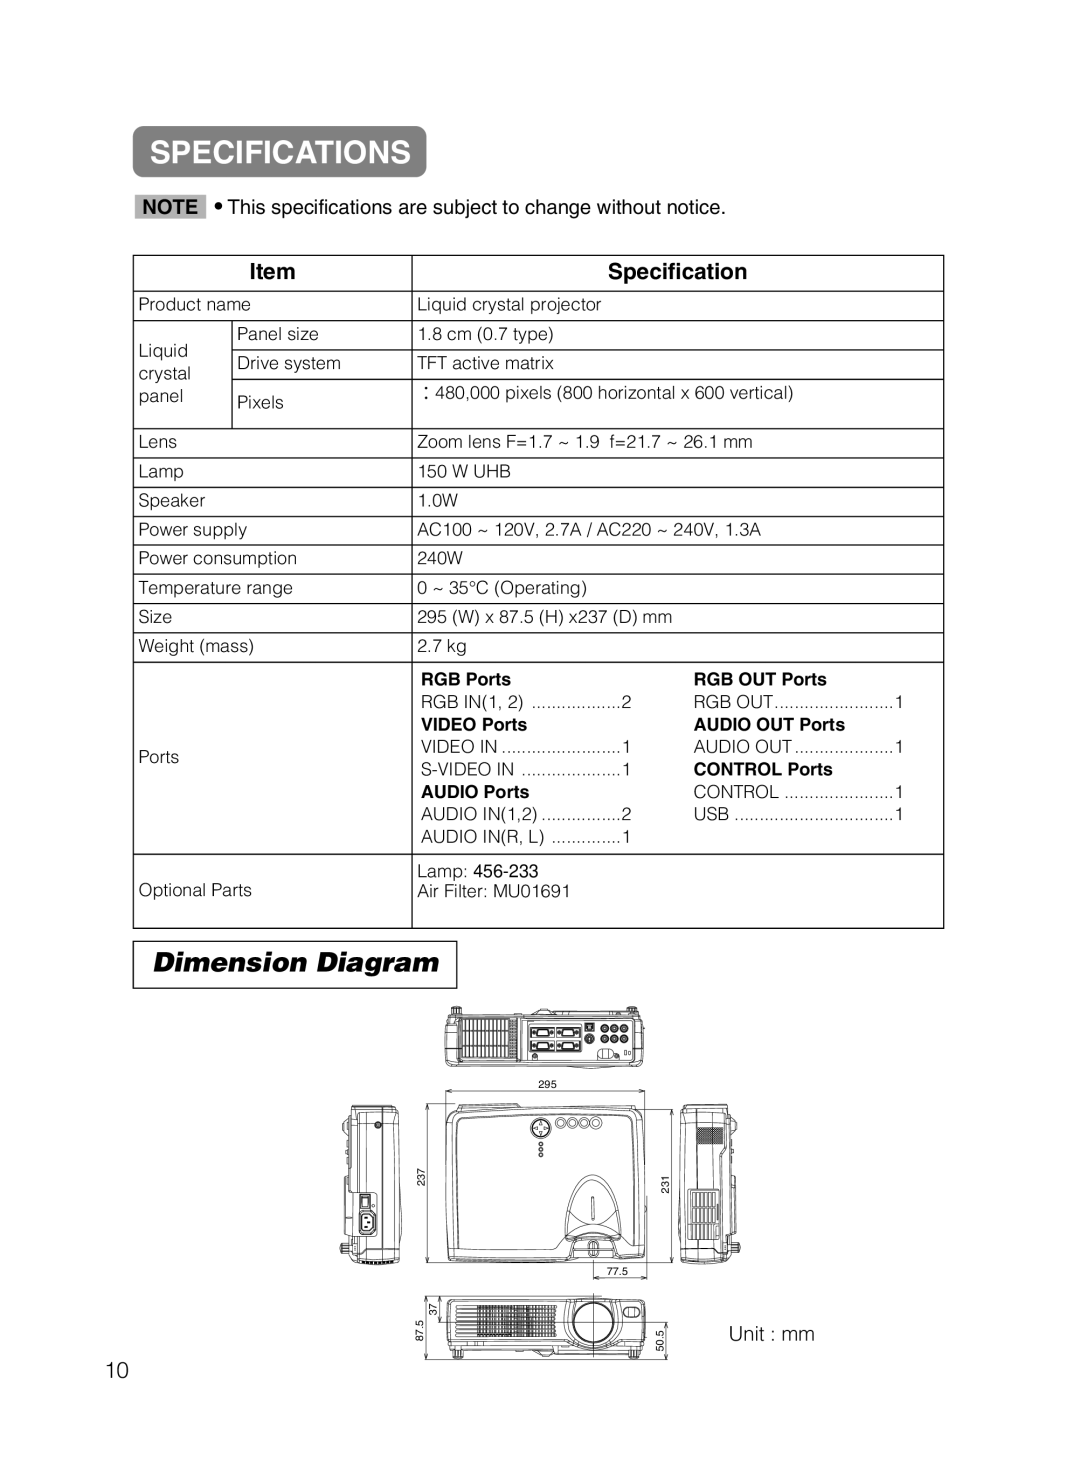 Dukane 28A8049B user manual Specifications, Dimension Diagram 